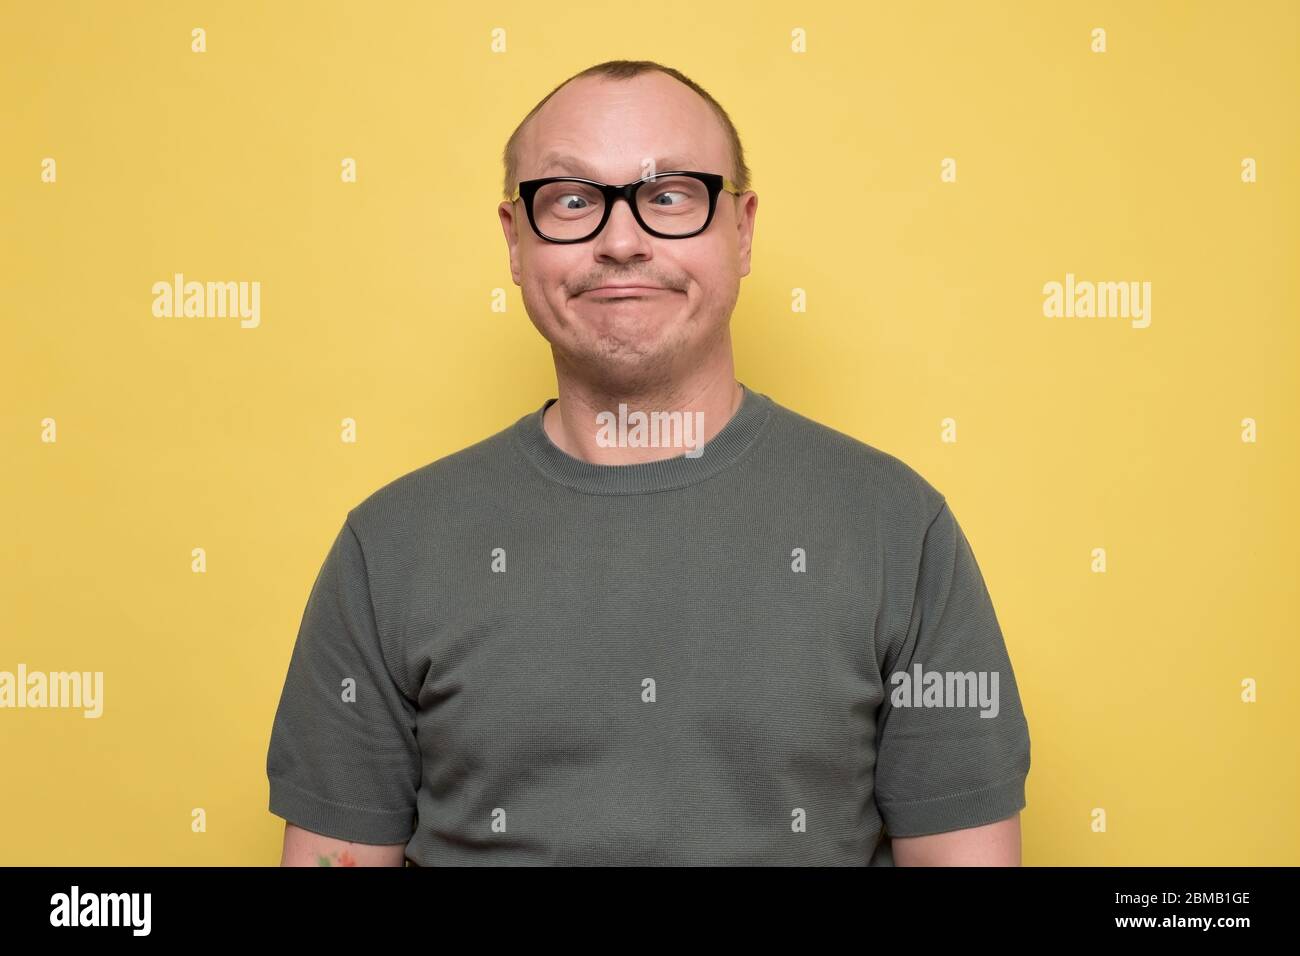 Crazy looking man in glasses making funny faces squinting eyes Stock Photo